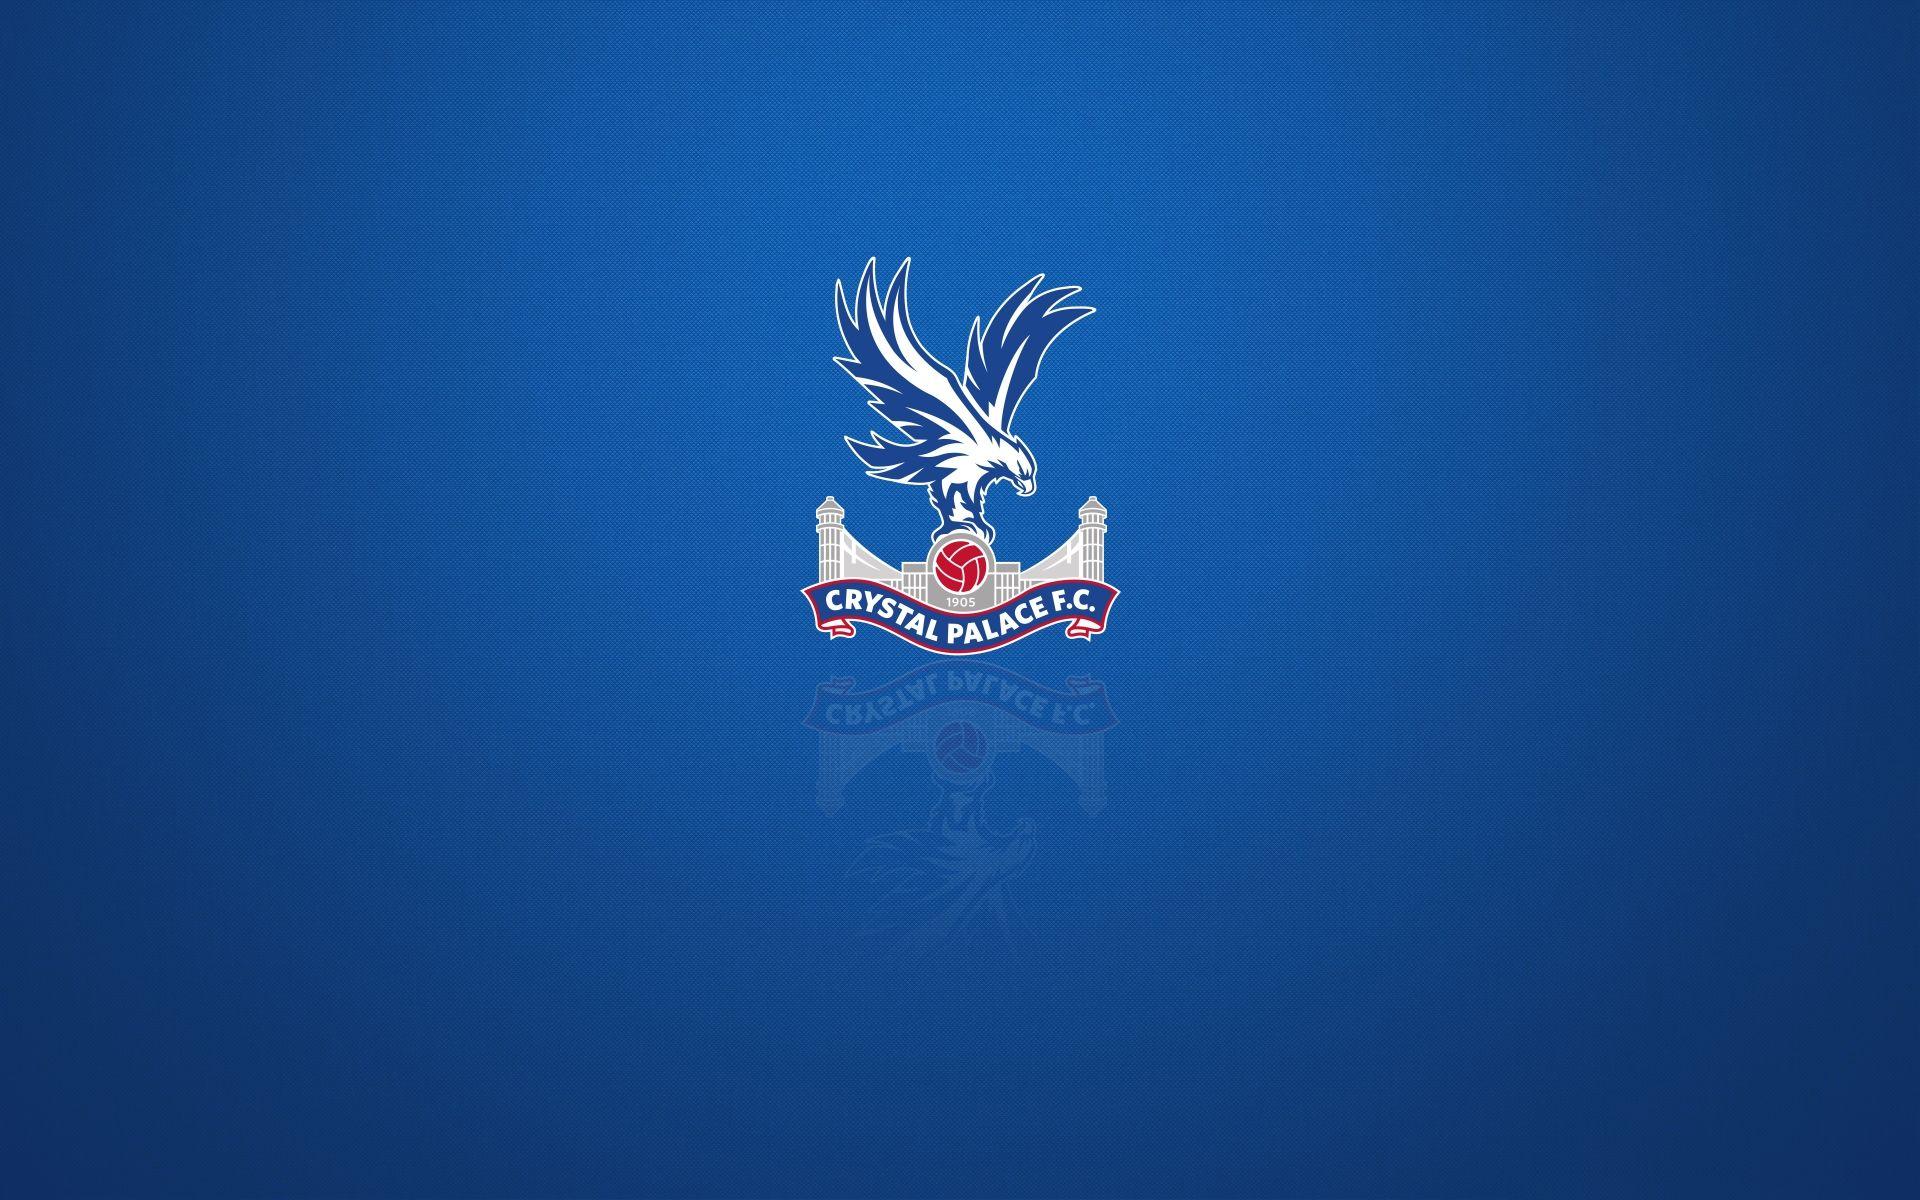 Crystal Palace Logo - Crystal Palace wallpaper, wide desktop background with club logo ...